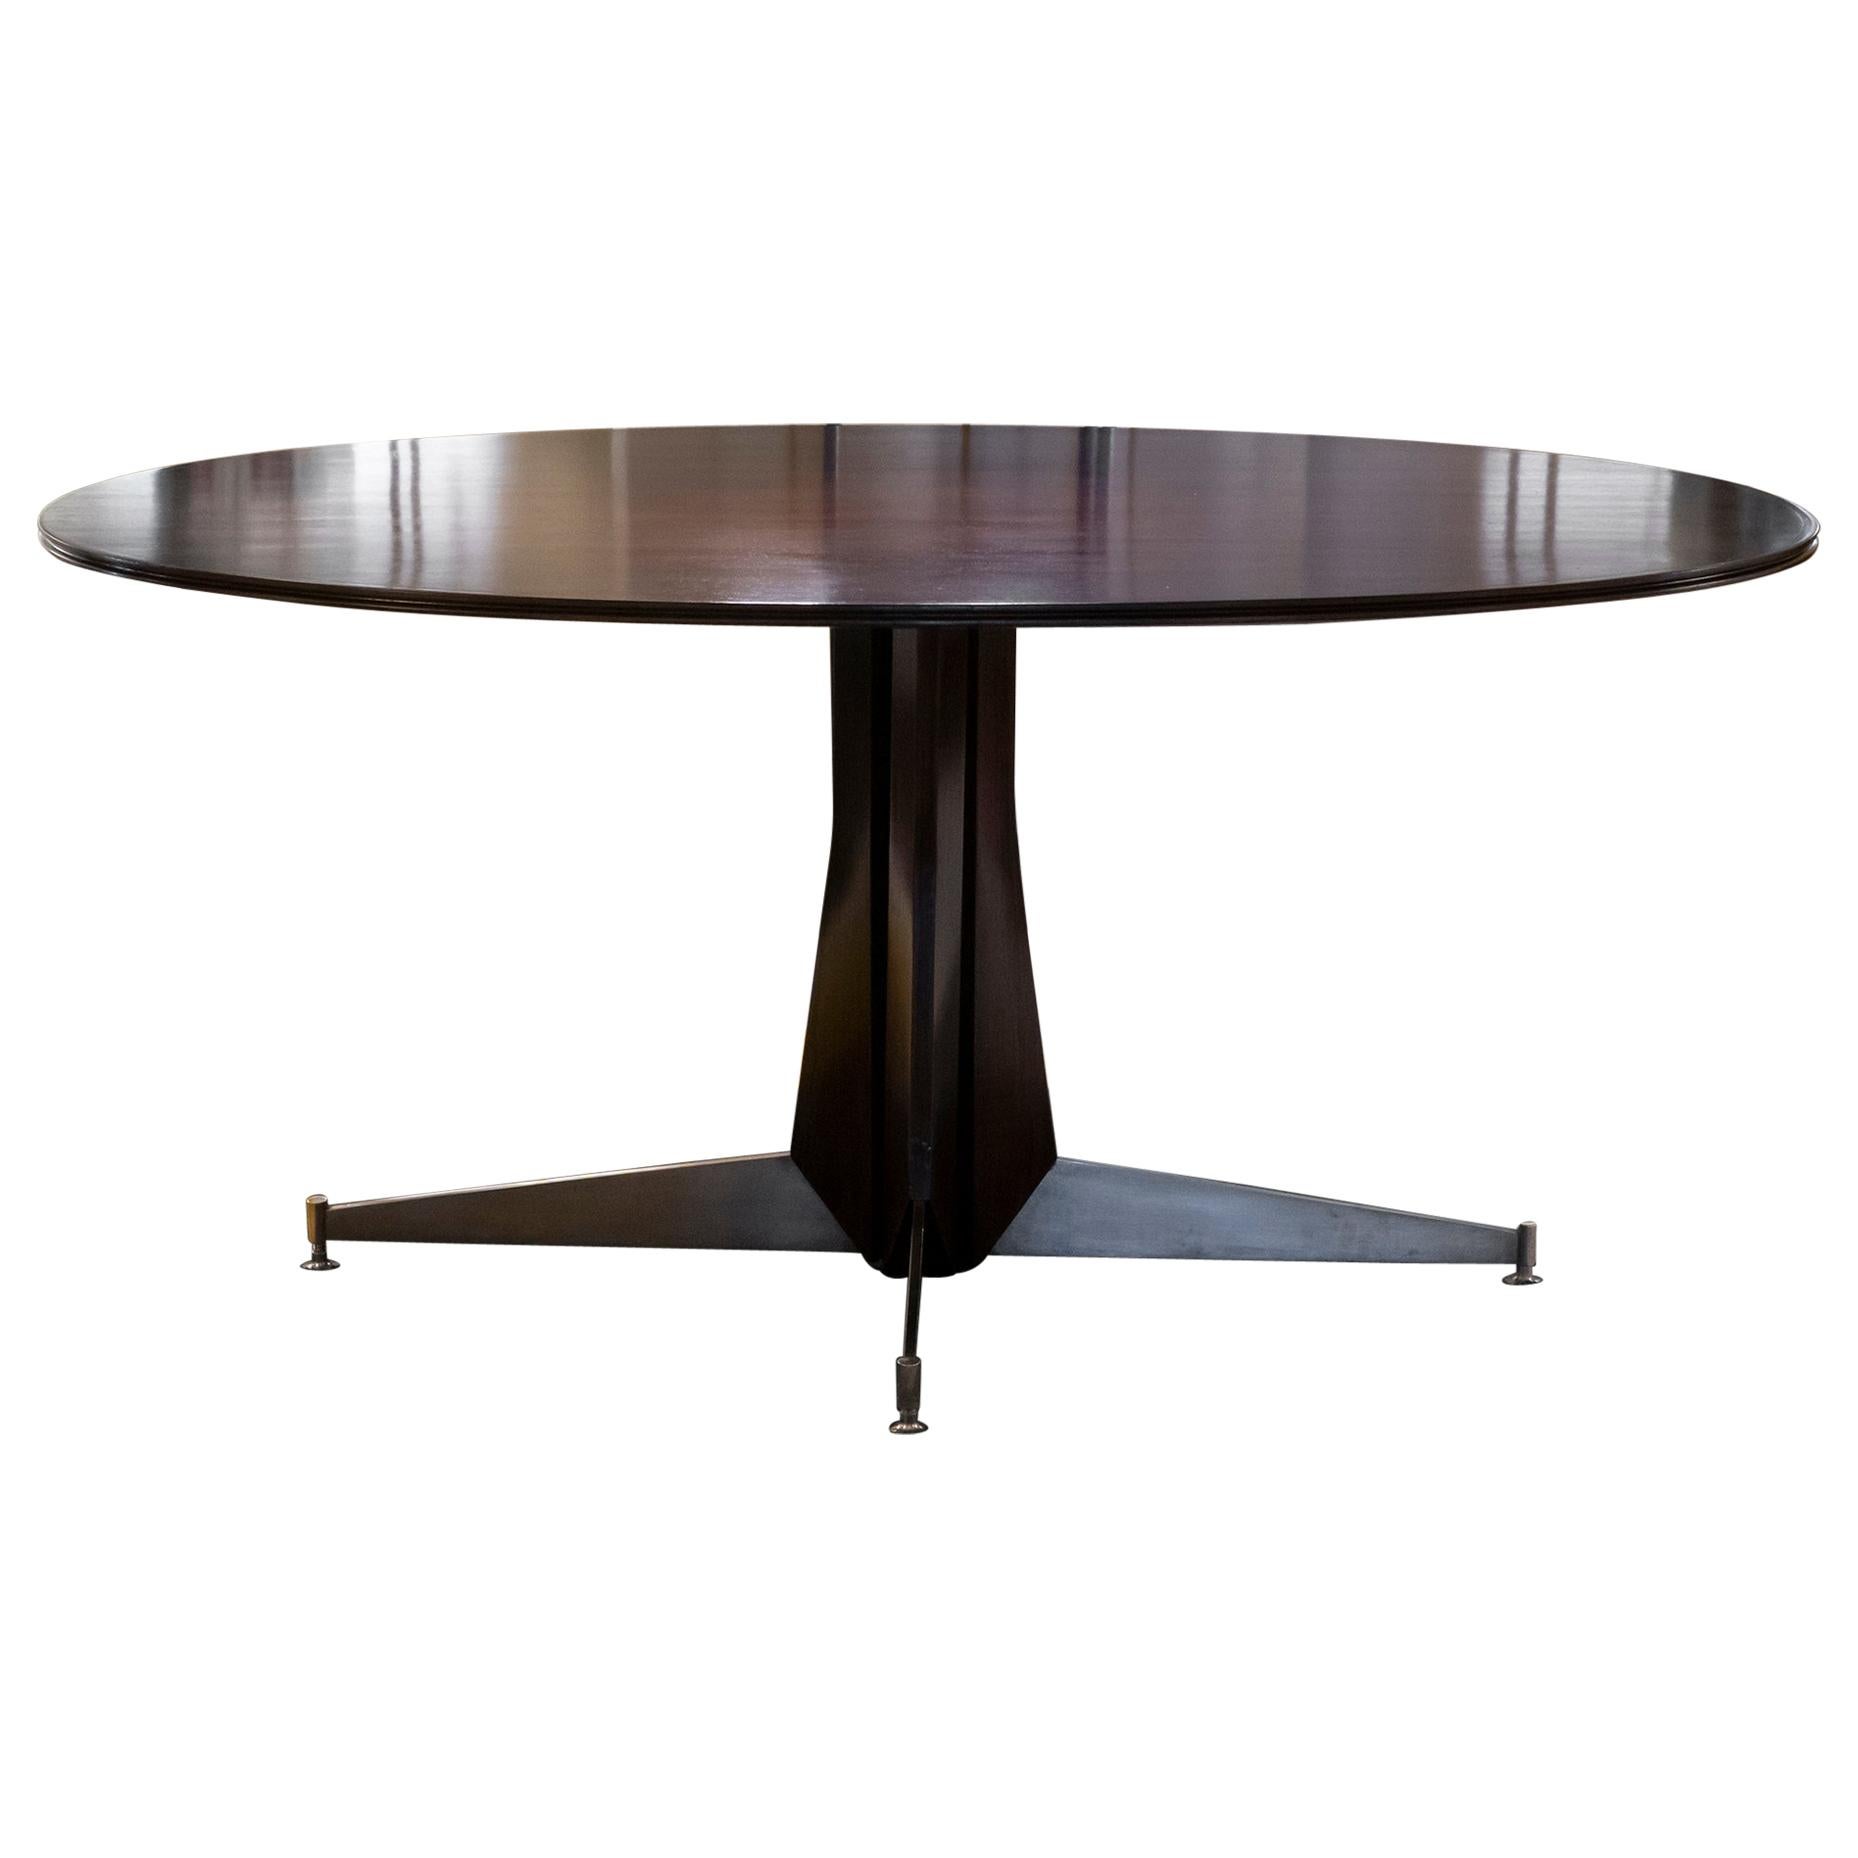 Mid Century Modern Oval Wood Dining Table, Brass Details, Italy, 1950s.